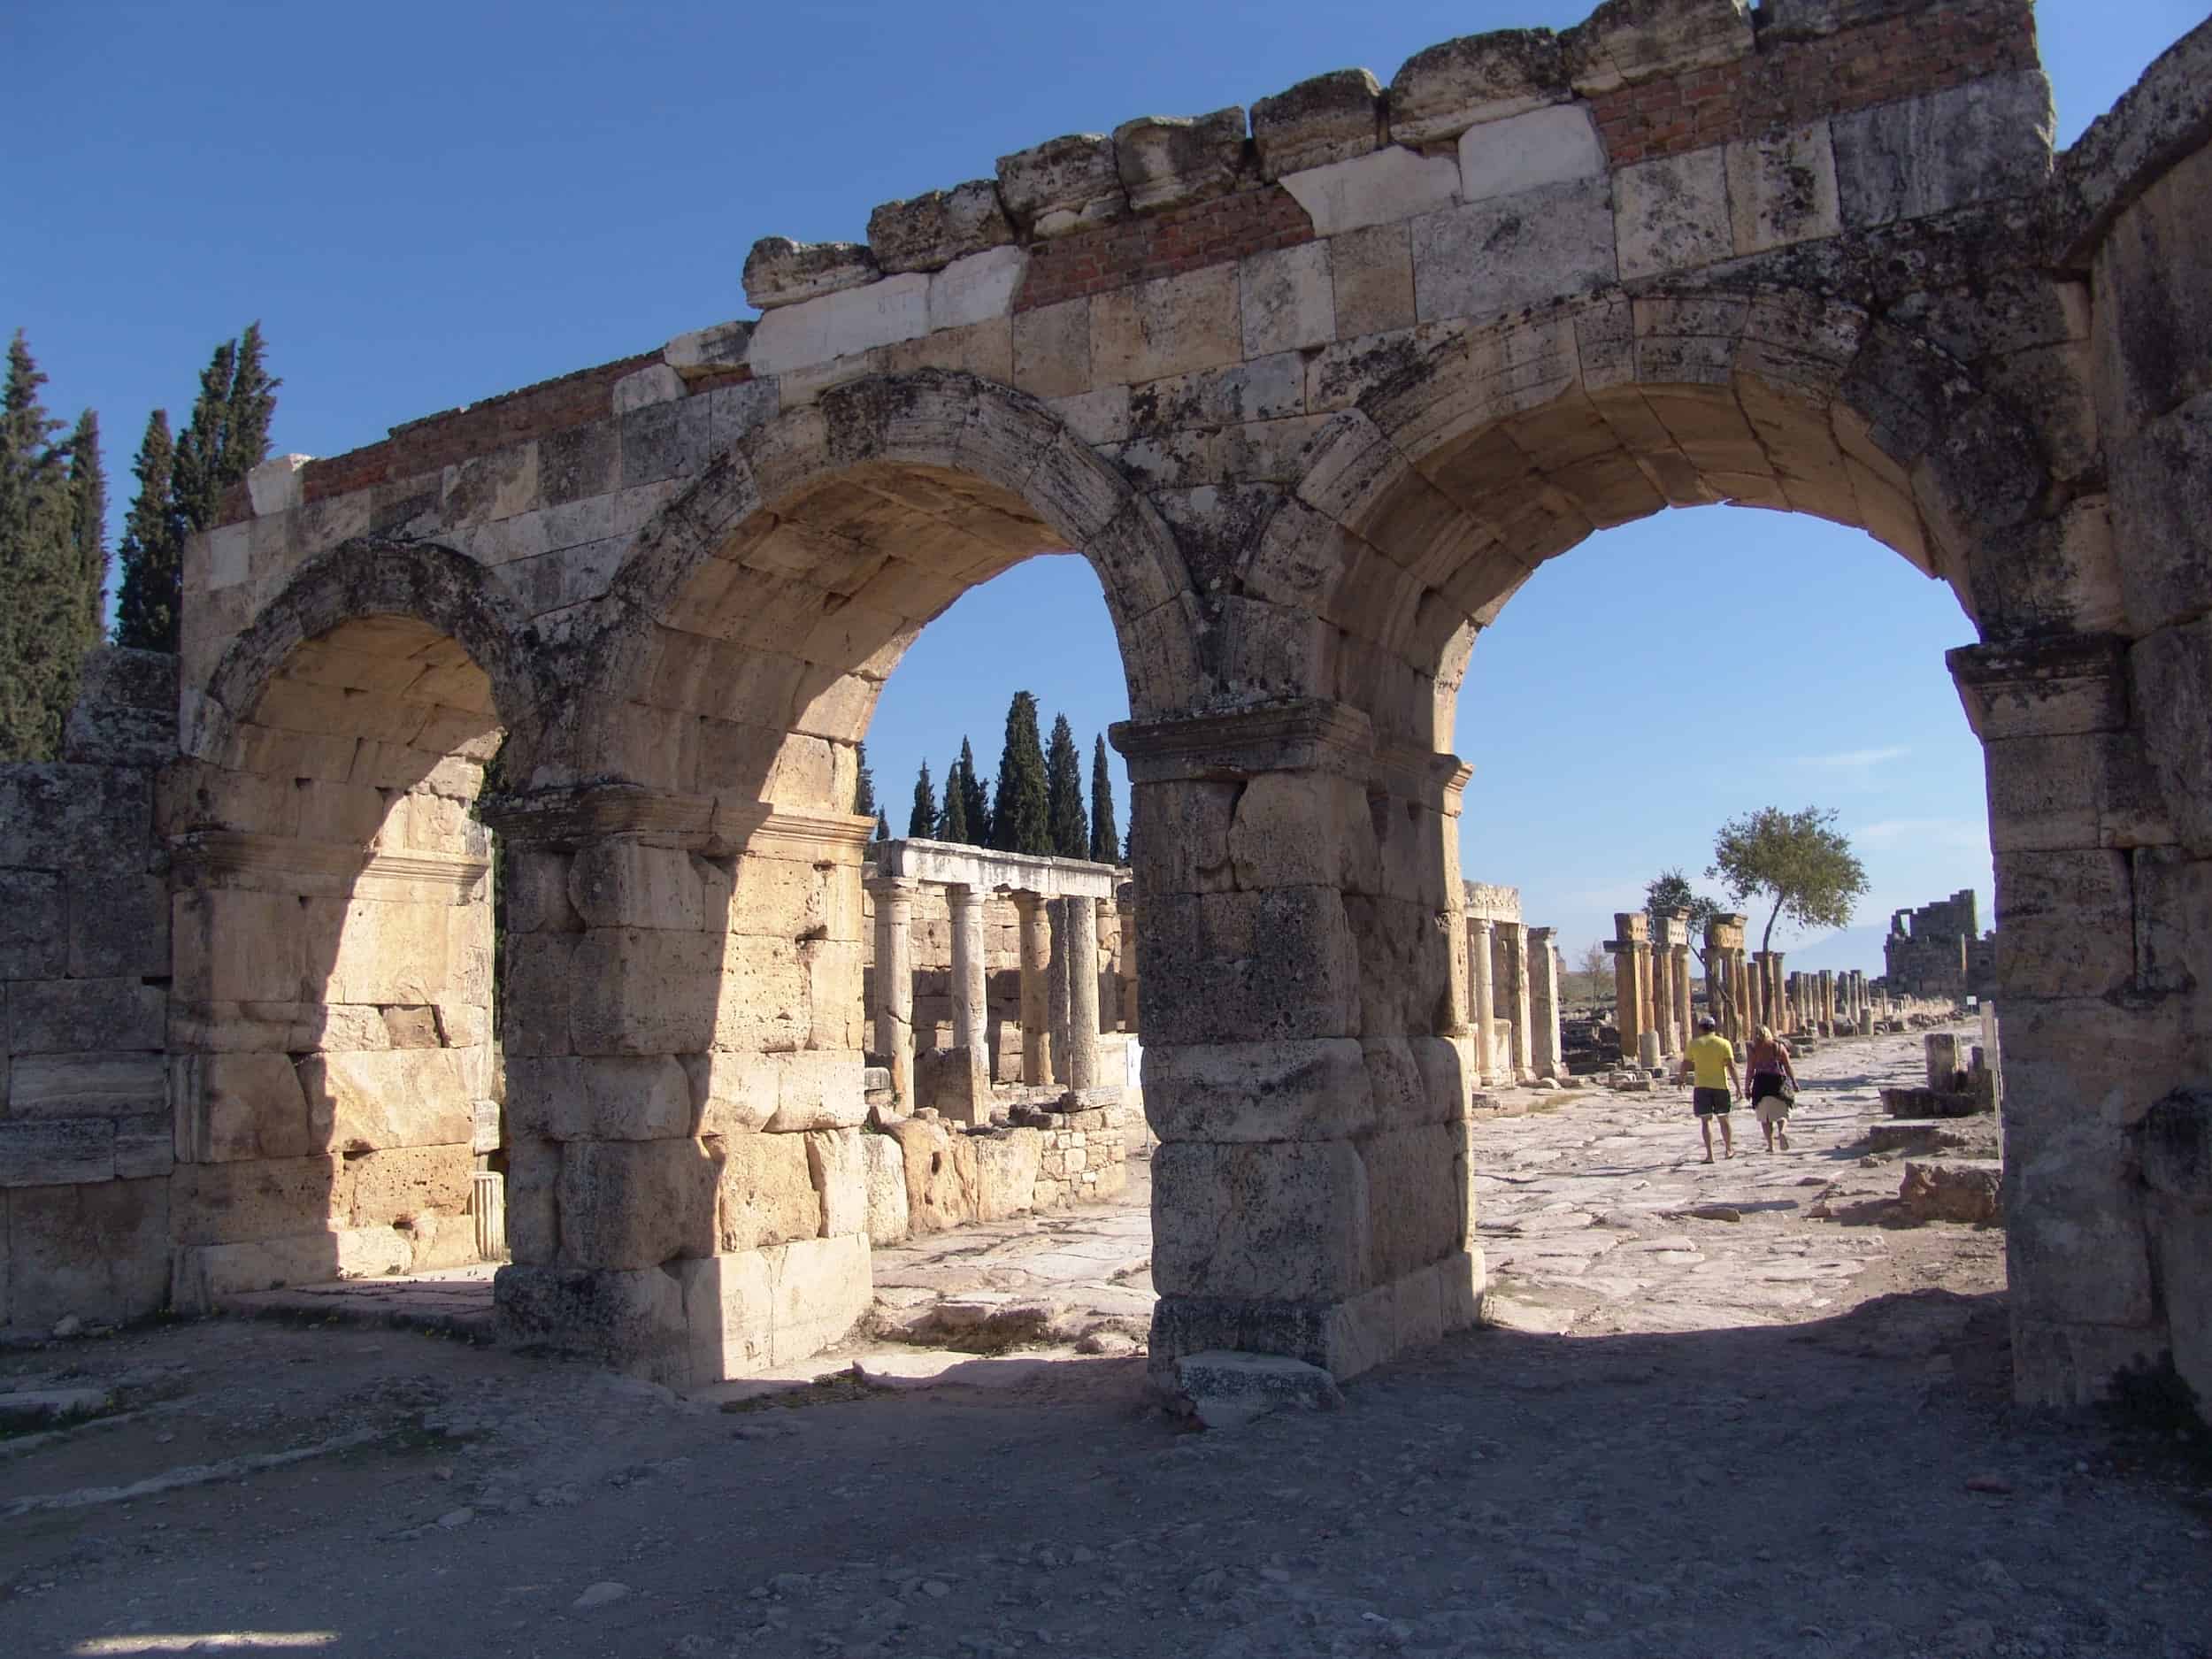 Arches of the Frontinus Gate